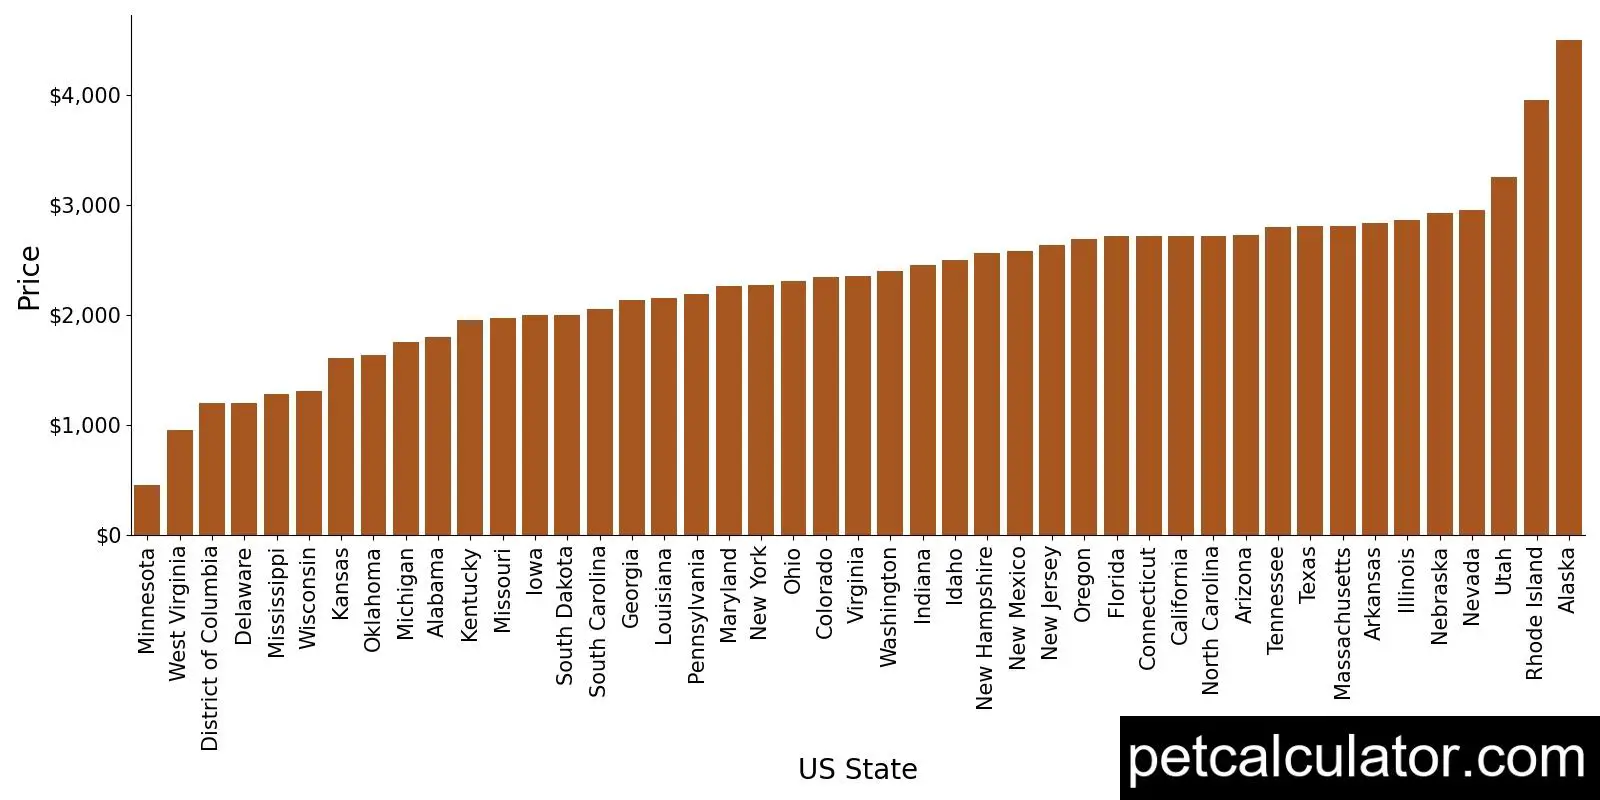 Price of Yorkshire Terrier by US State 